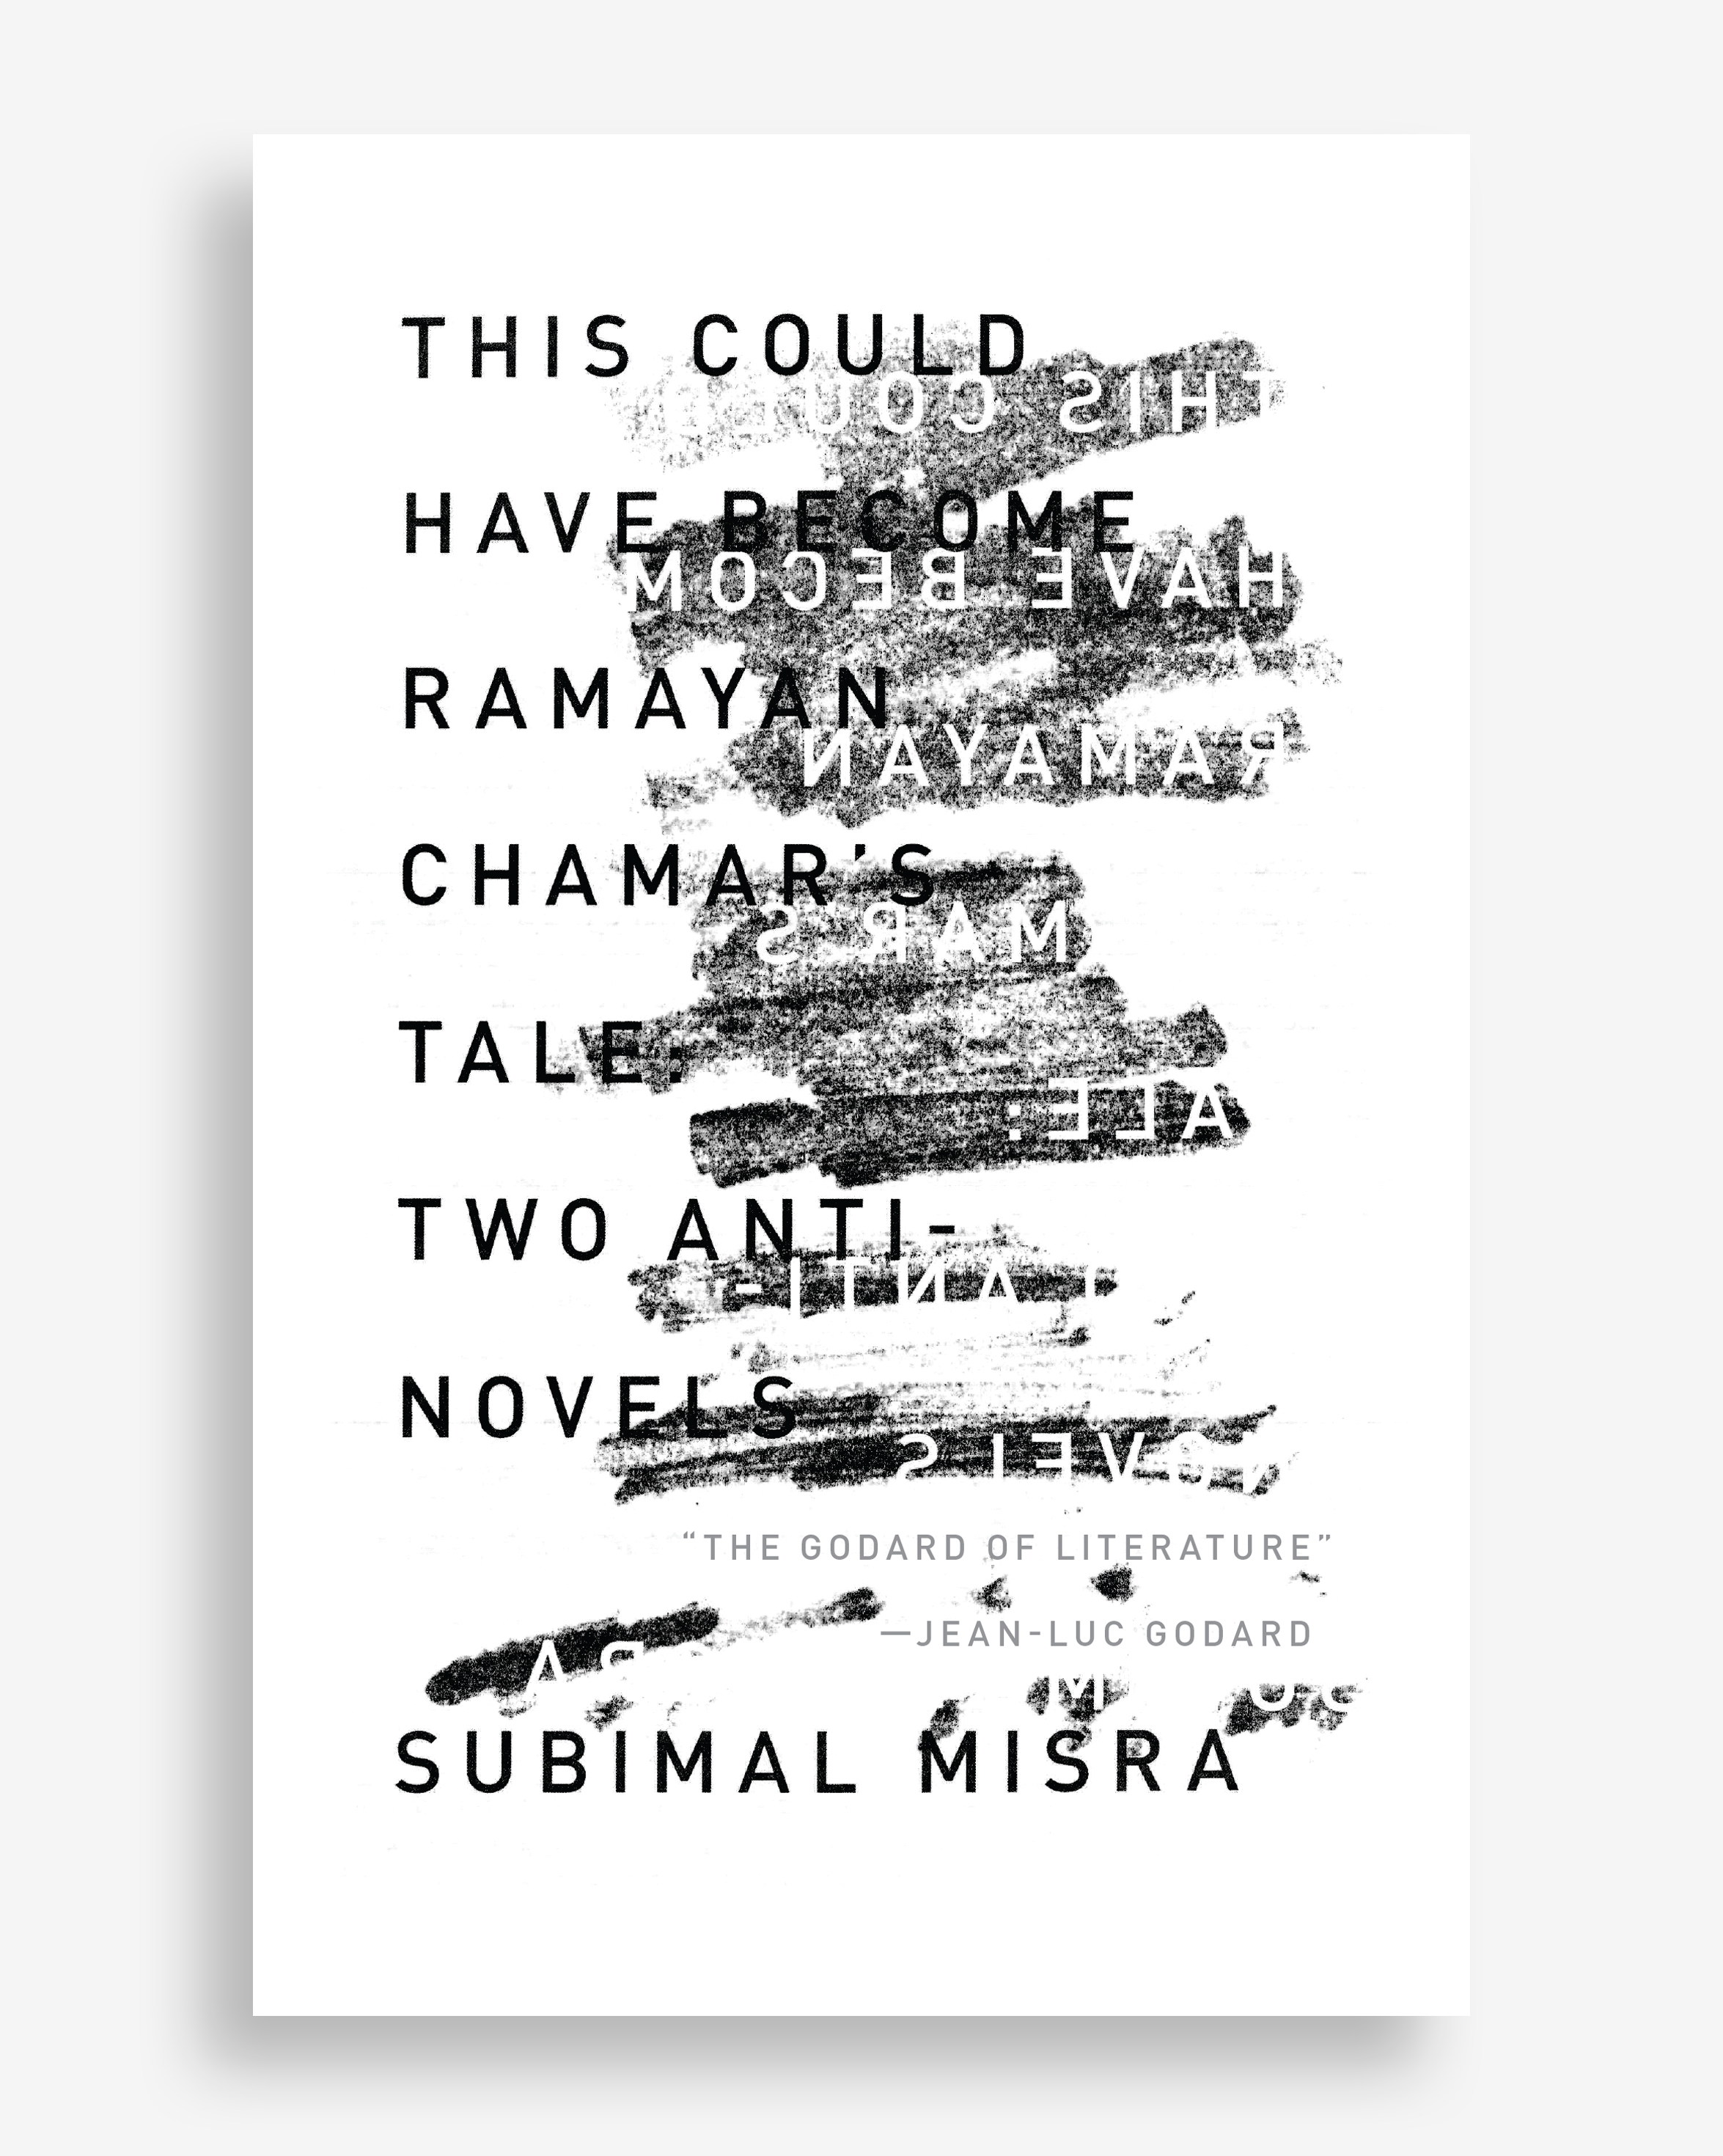 A typography-based book cover design.